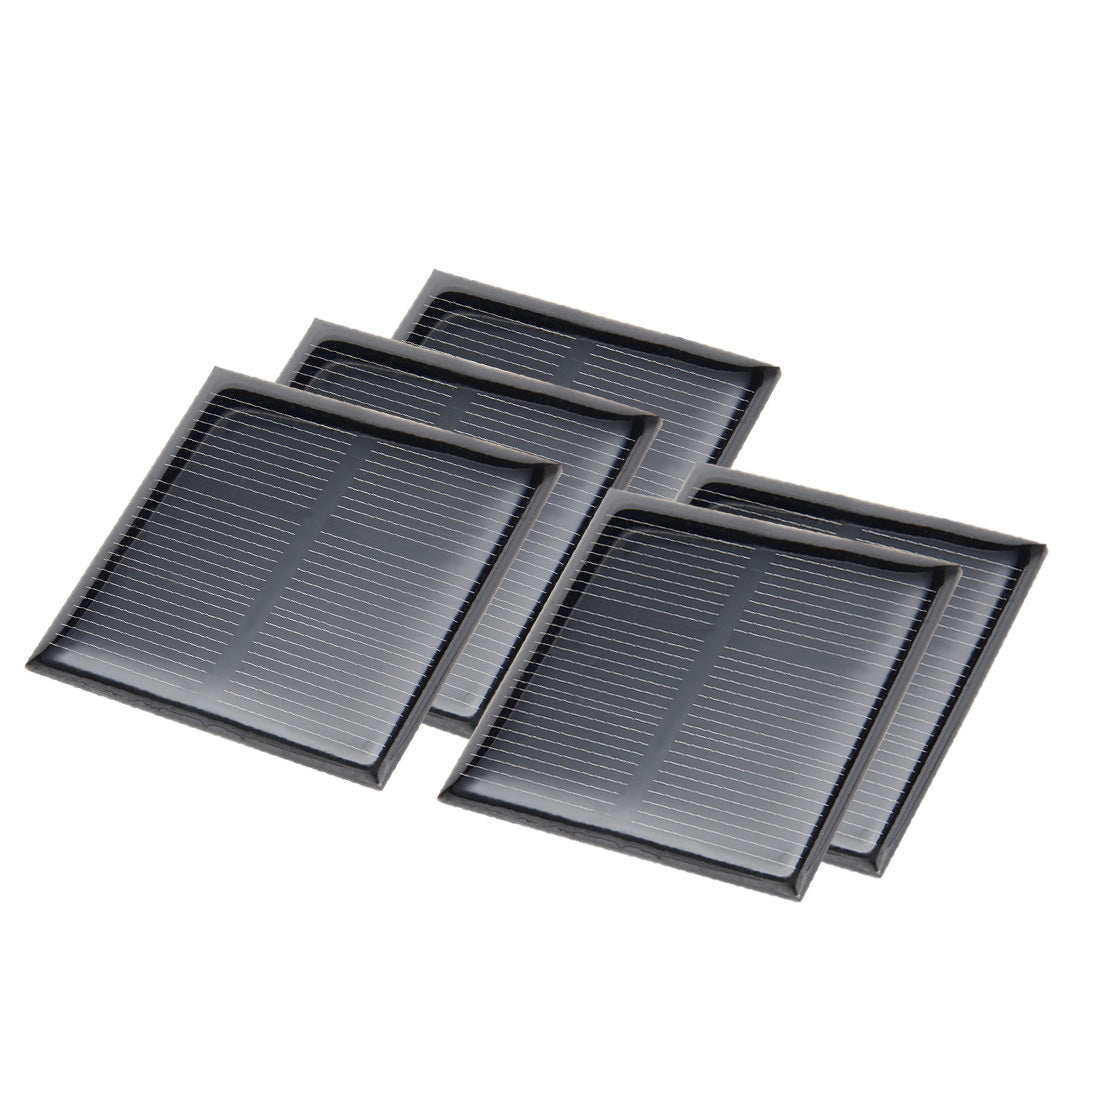 uxcell Uxcell 5Pcs 1.5V 200mA Poly Mini Solar Cell Panel Module DIY for Light Toys Charger 52mm x 52mm